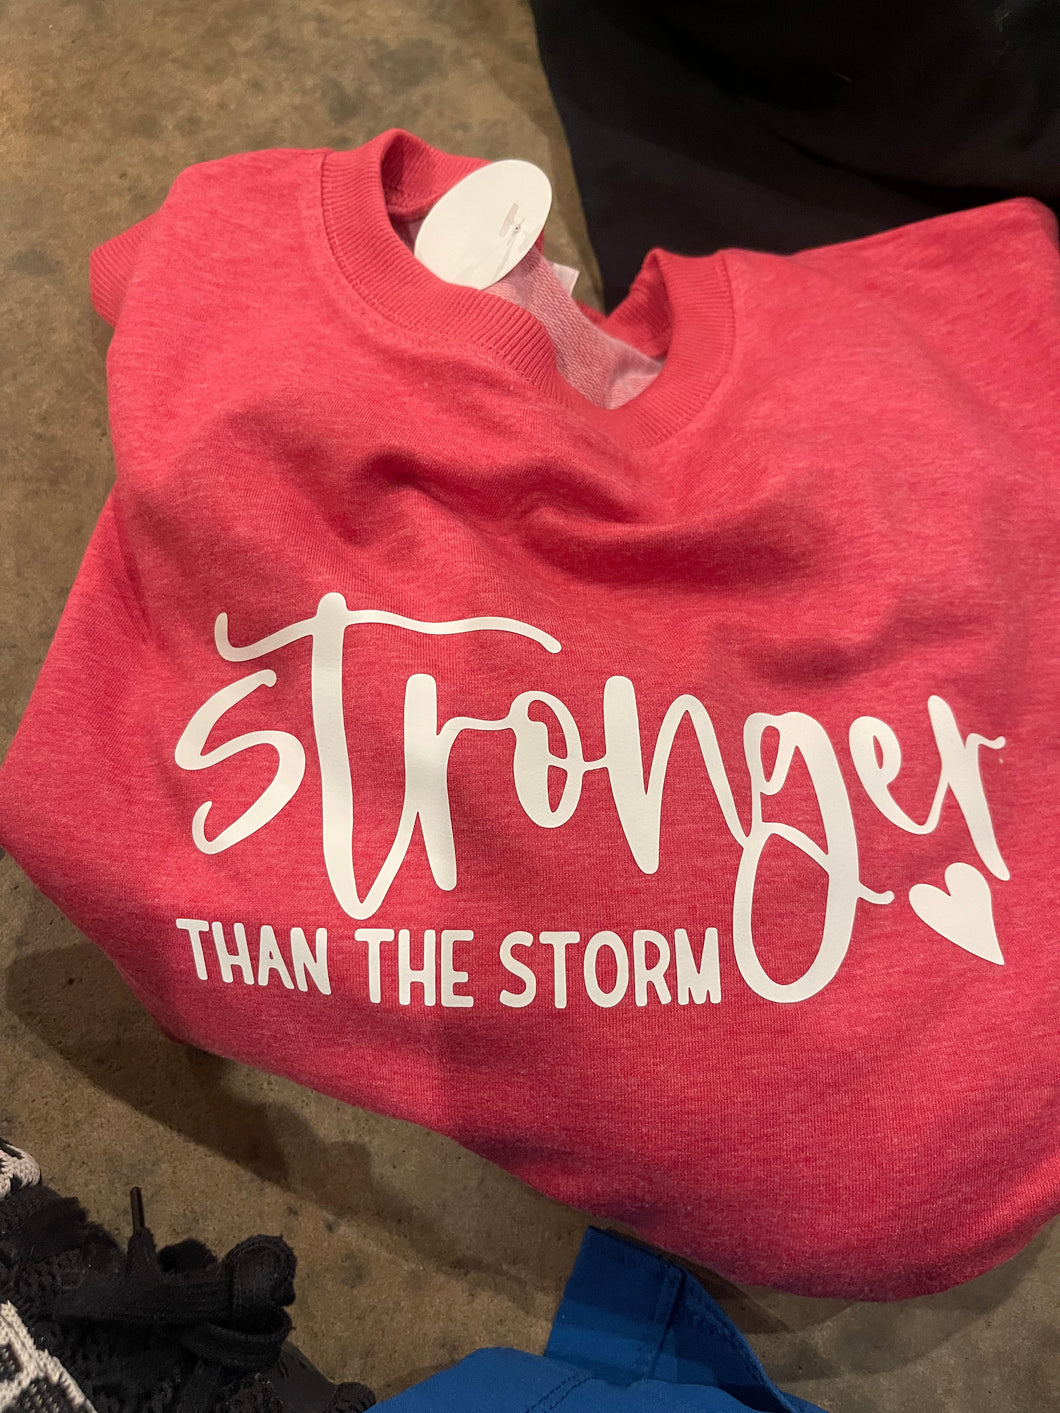 Stronger than storm